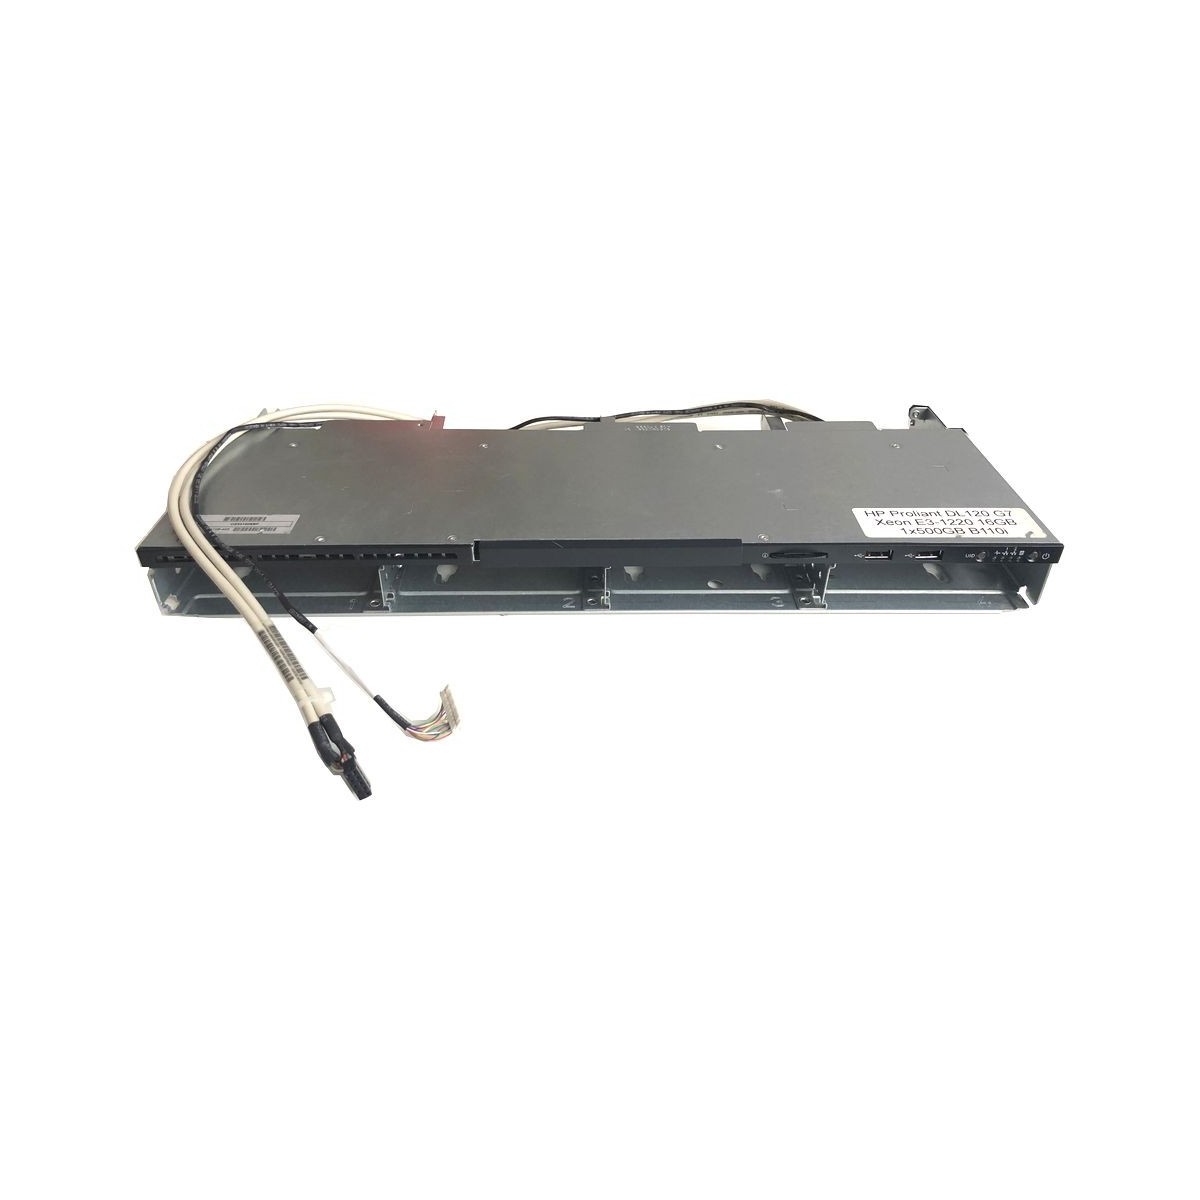 FRONT PANEL HP DL120 G7 644706-425